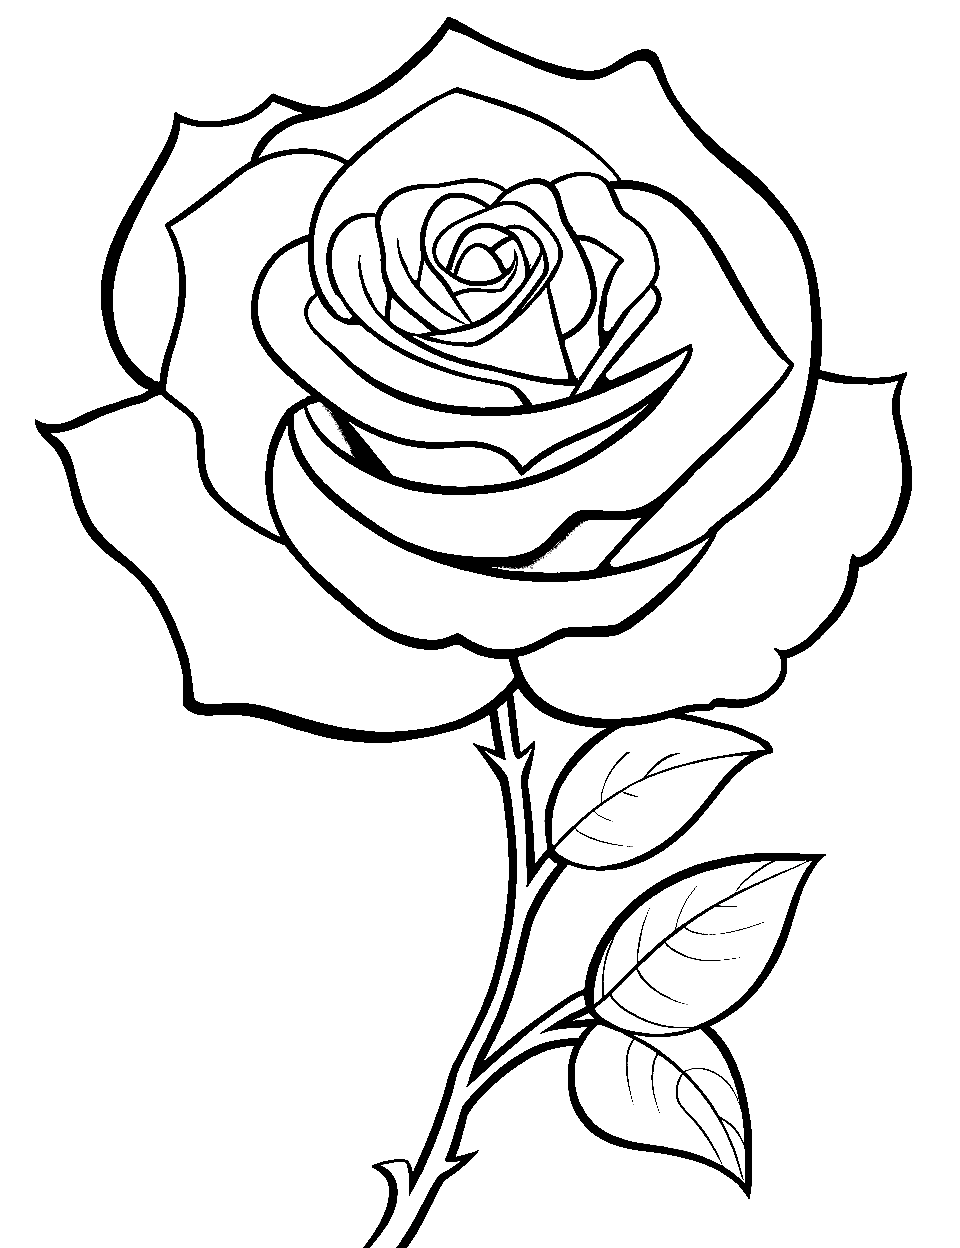 Rose Radiance Coloring Page - A rose in full bloom.